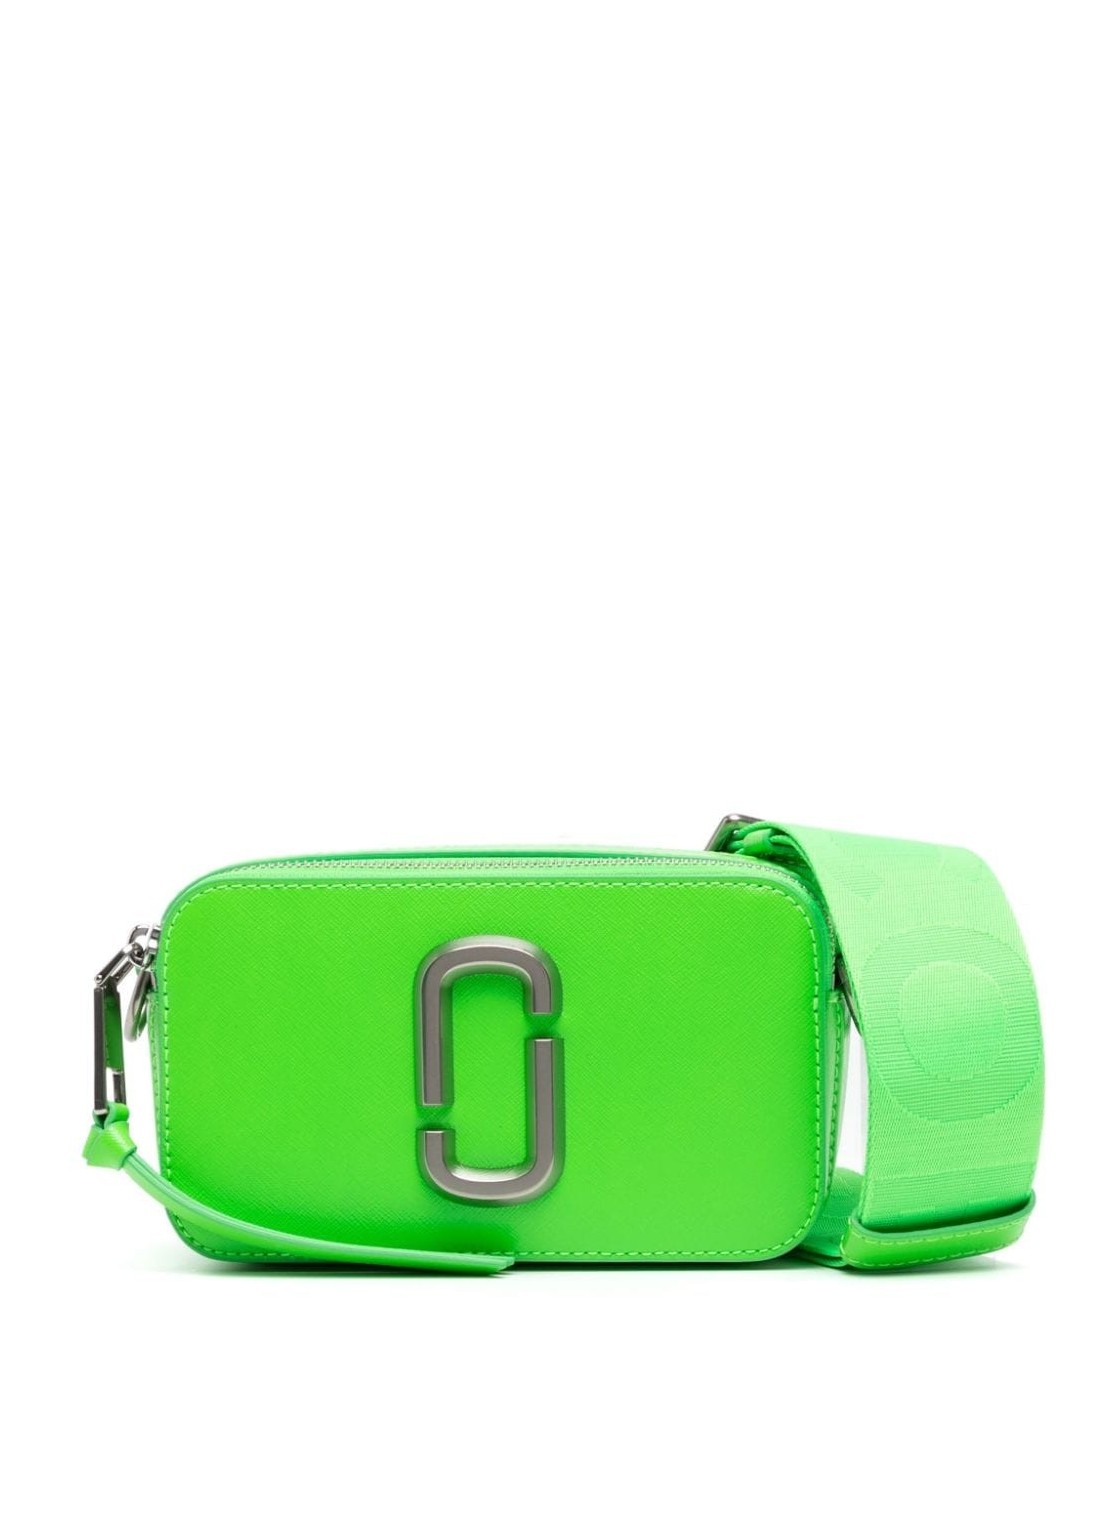 Marc Jacobs: THE SNAPSHOT In Mint Green